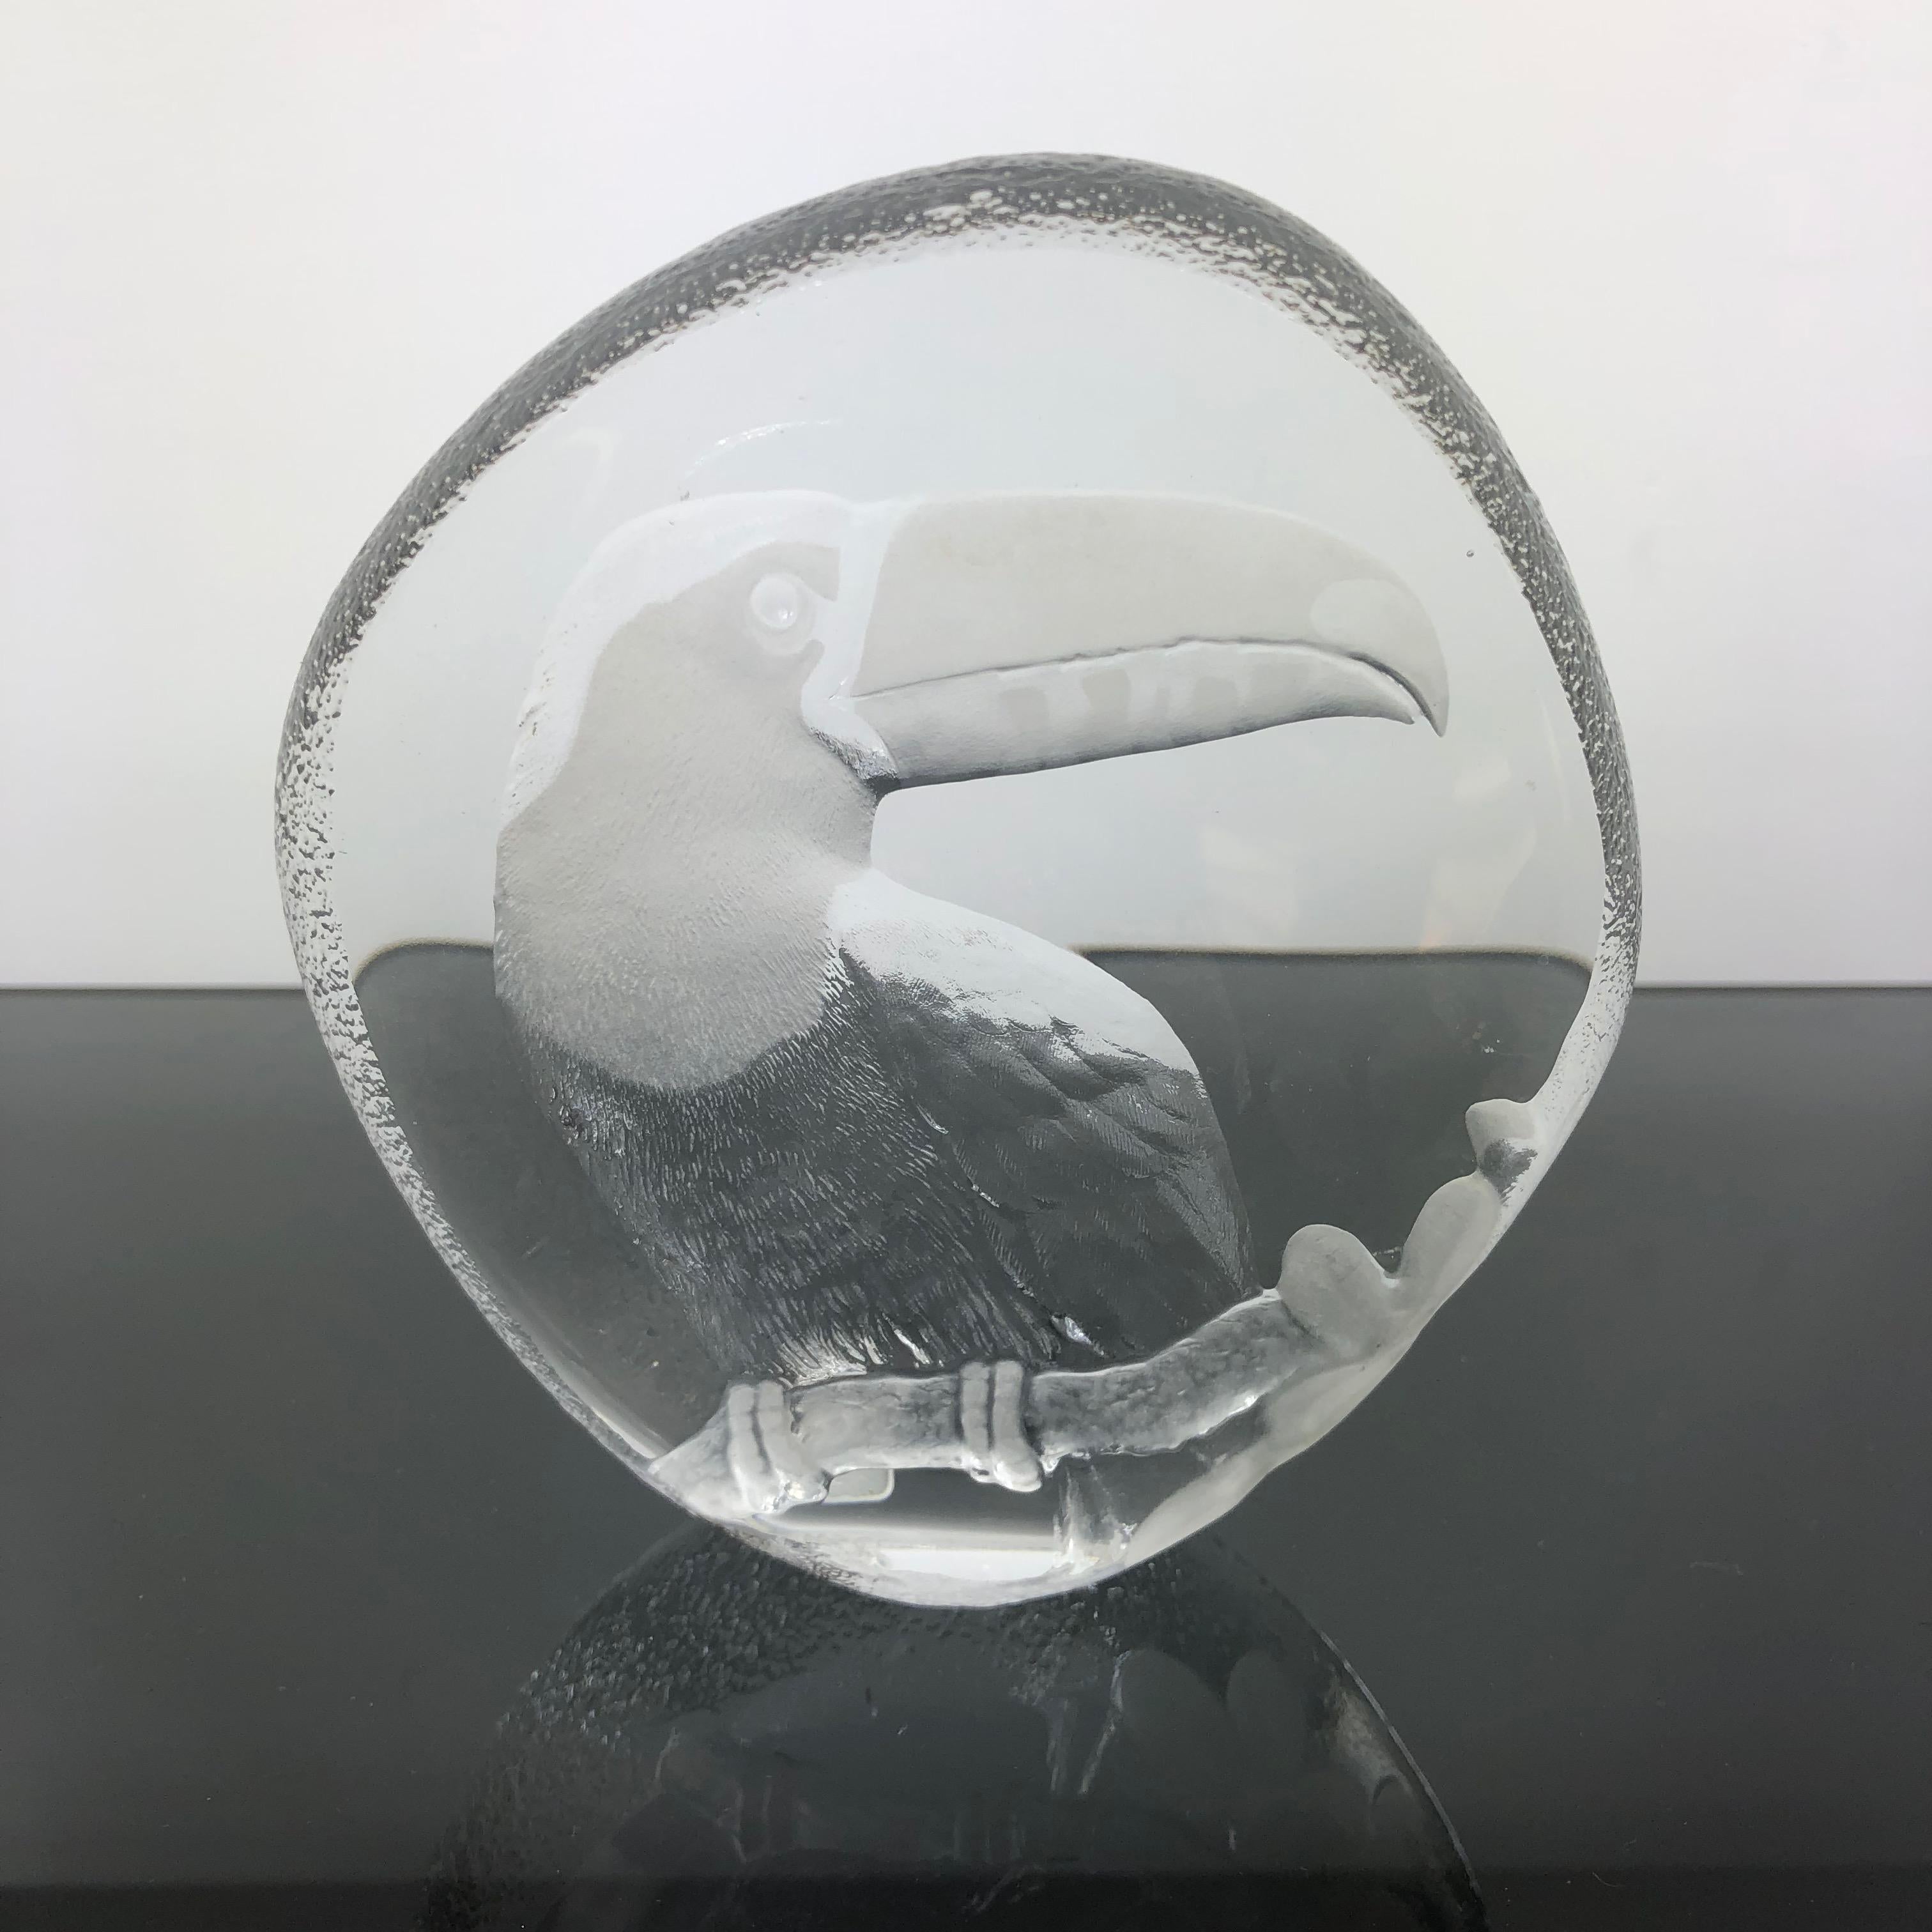 A lead crystal glass paperweight, produced circa 1980s by Mats Jonasson of Sweden, designed as a seal, with frosted detail in the shape of a toucan. Markings include signature [Mats Jonasson, Sweden] and serial number to the base next to the